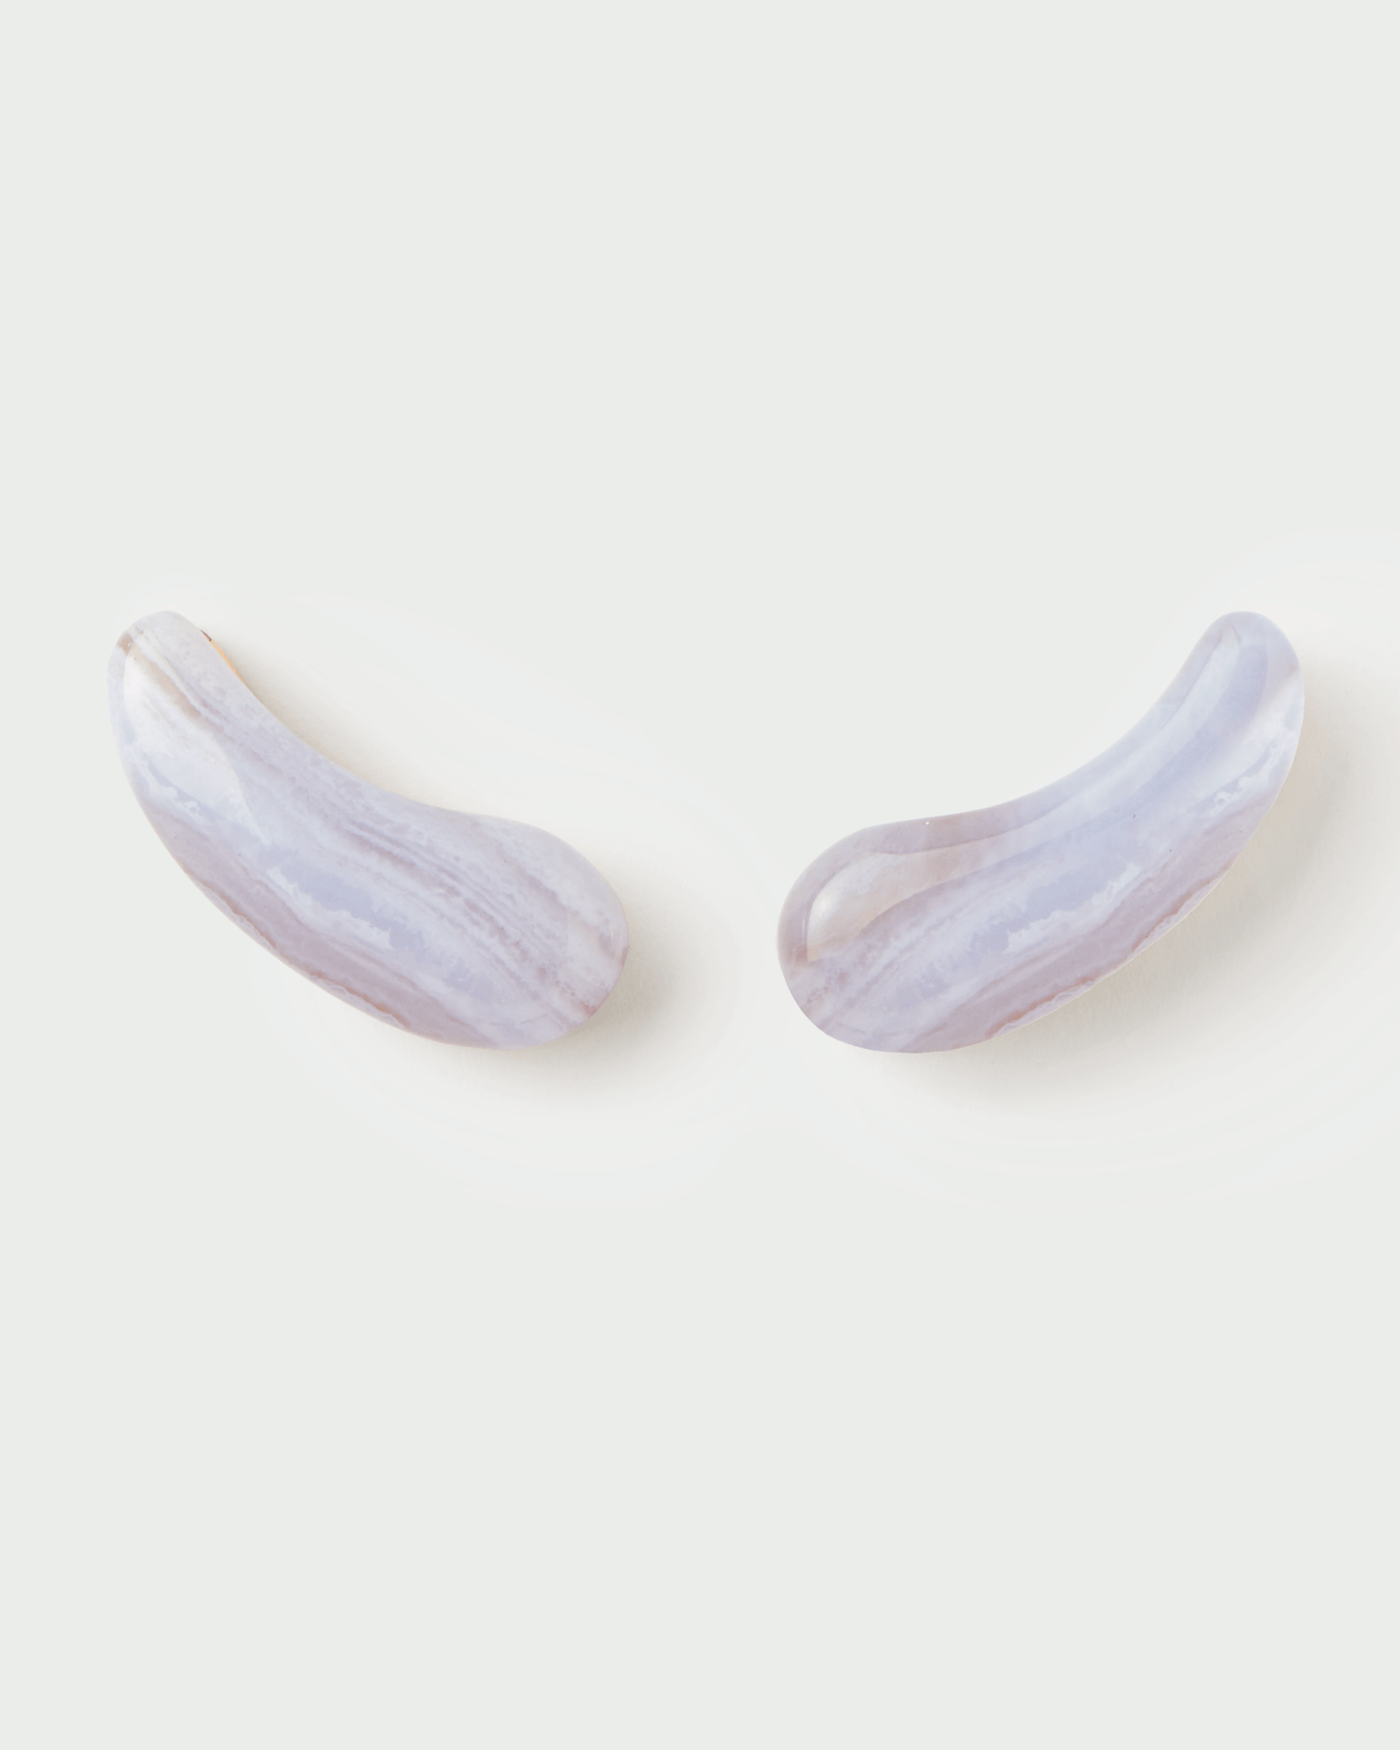 Blue lace agate Aqua earrings. Gold-plated sculptural climbing earrings with a wavy bean blue gemstone  . Get the latest arrival from PDPAOLA. Place your order safely and get this Best Seller.